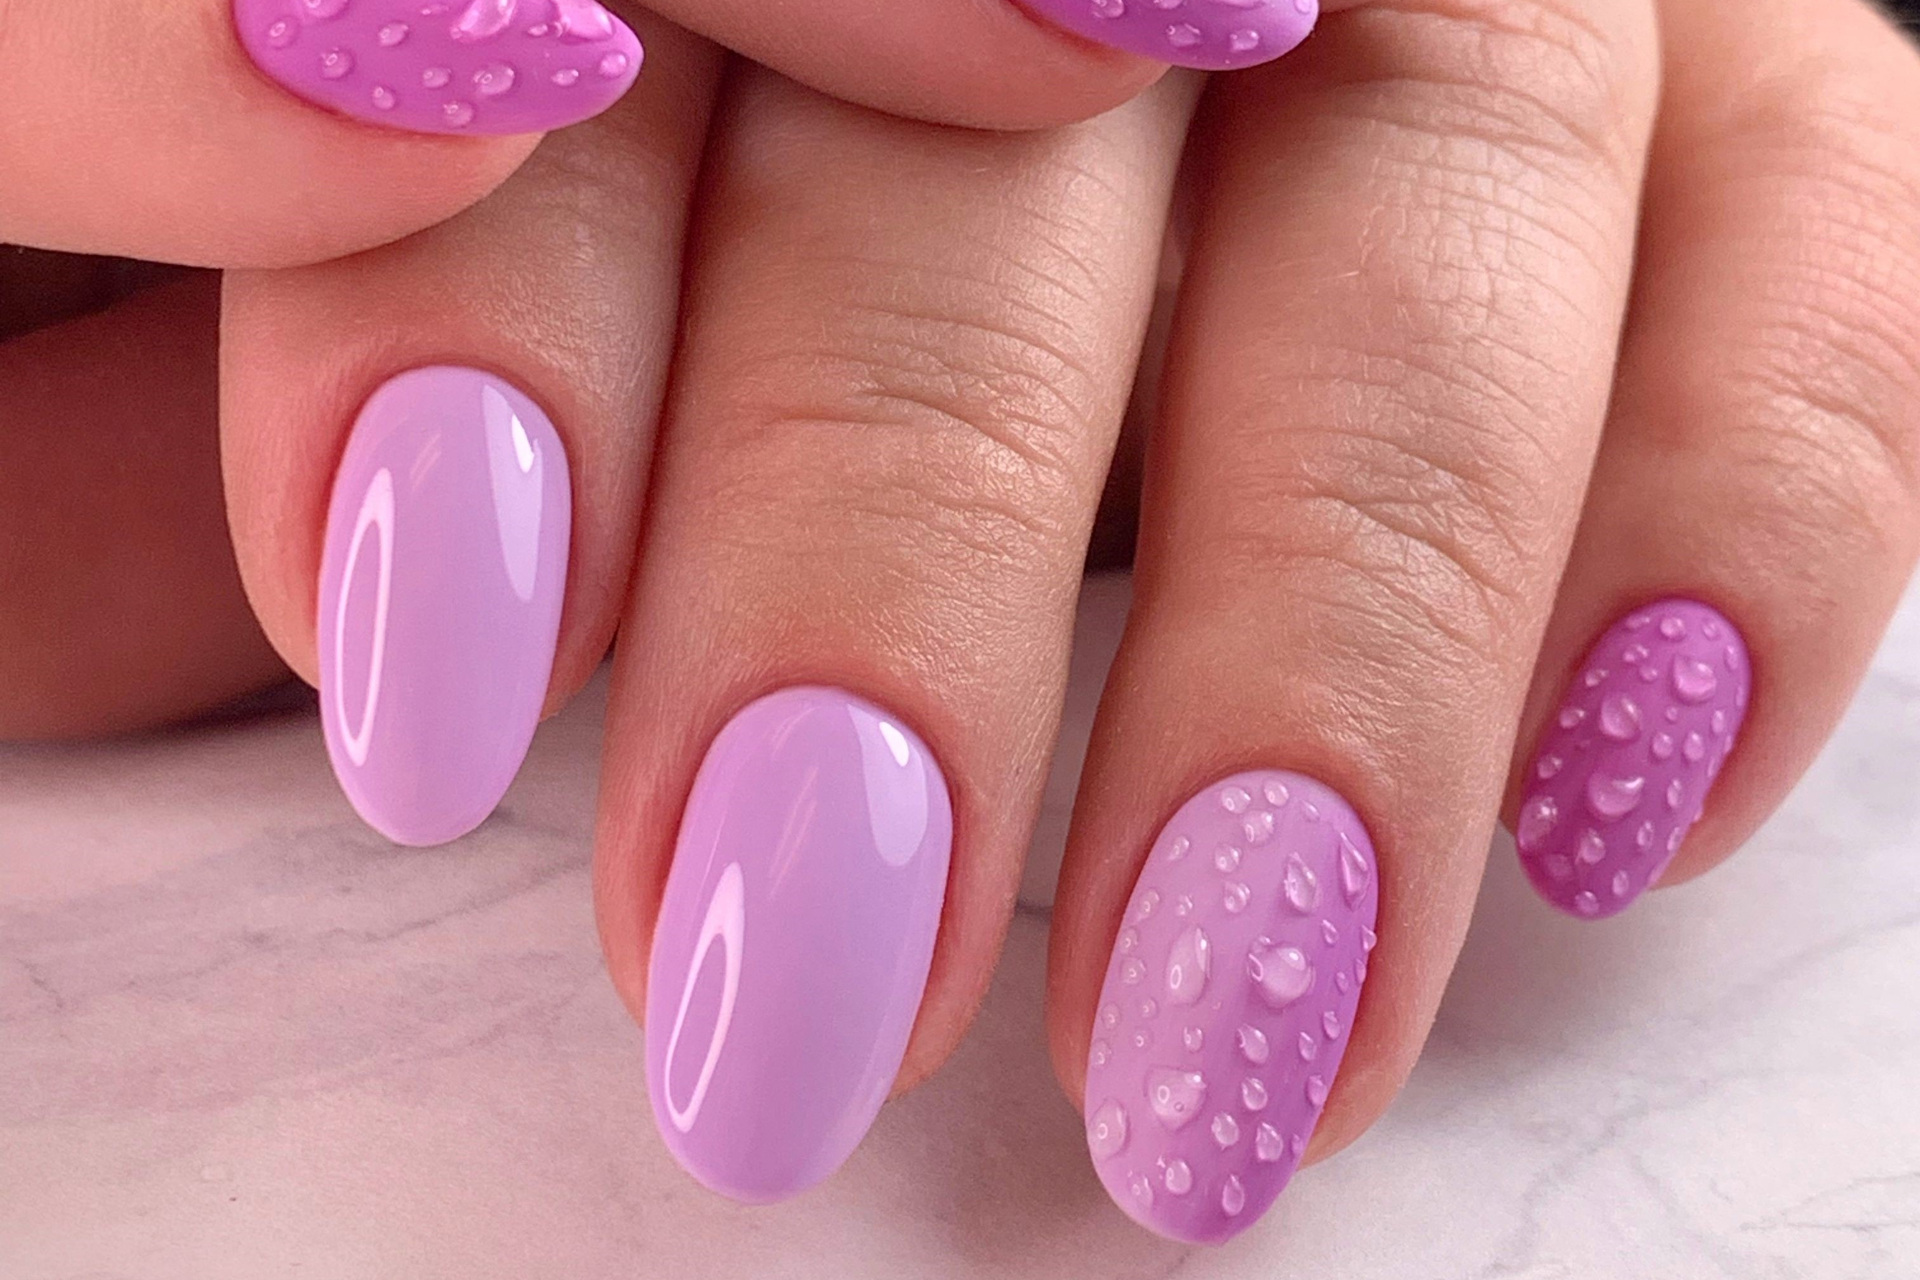 We're Calling It: Dew Drop Nails Will Be Summer's Go-To Manicure